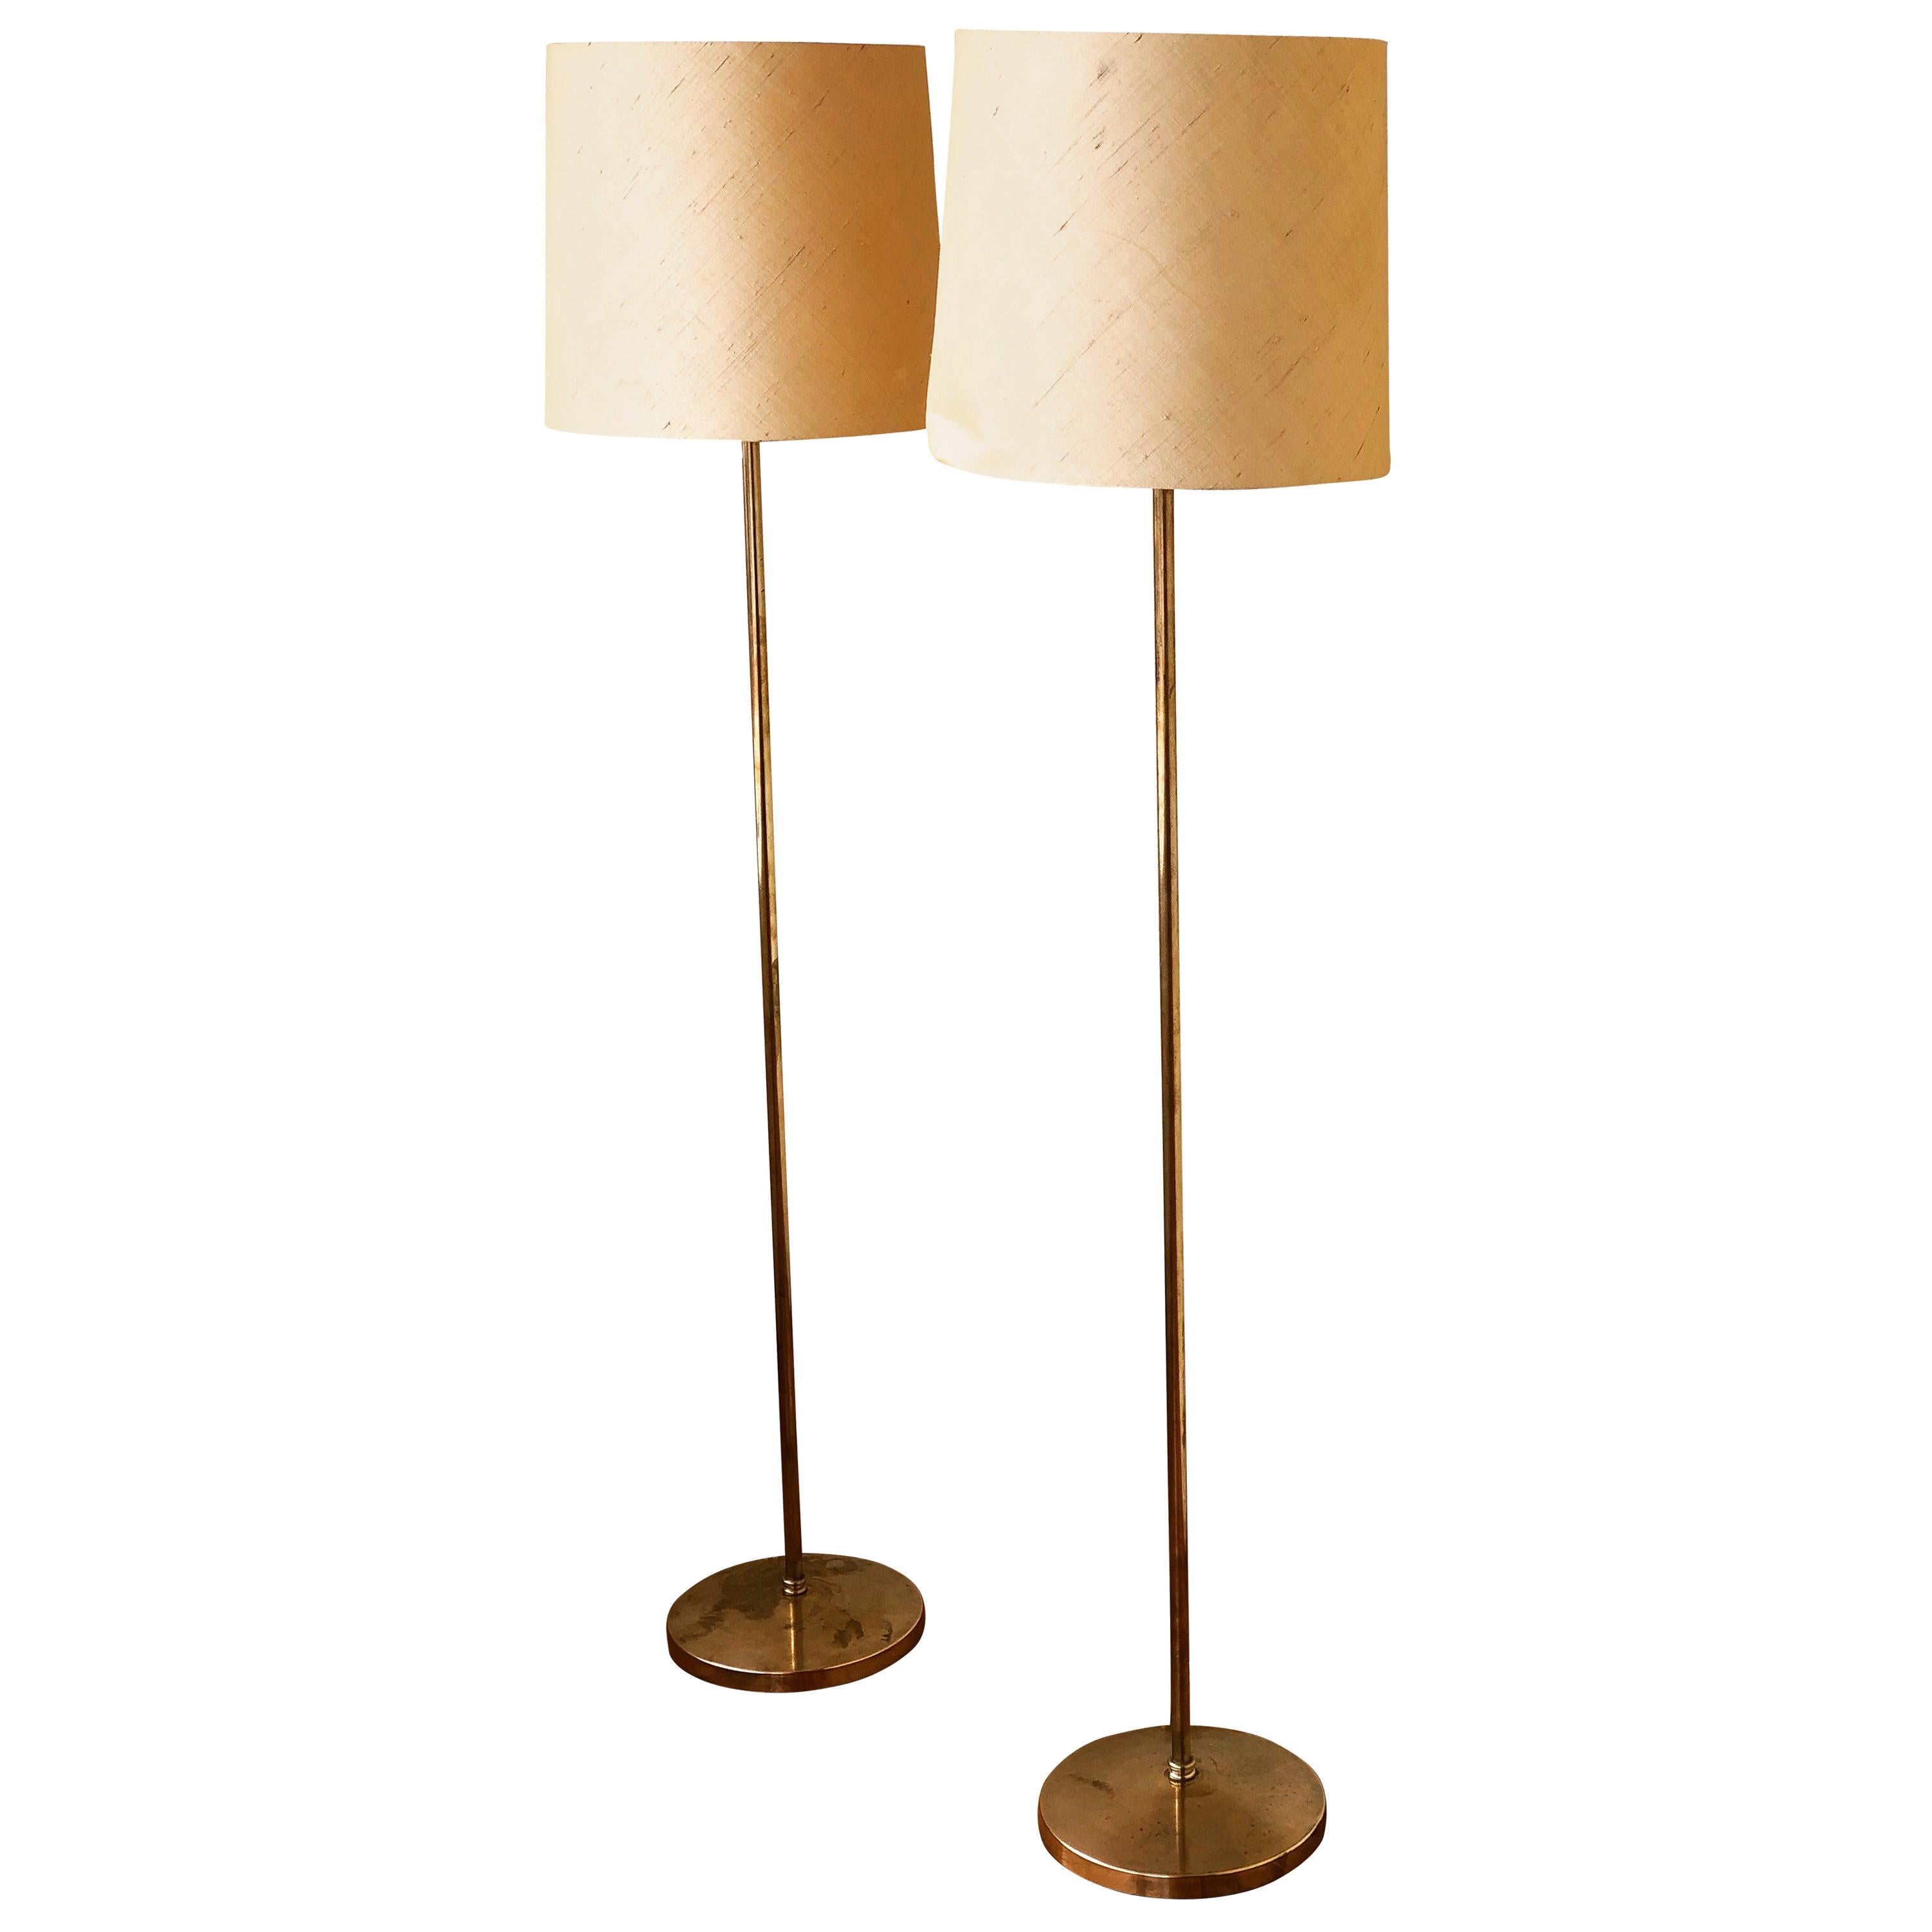 Pair of Hans-Agne Jakobsson Polished Brass Floor Lamps For Sale